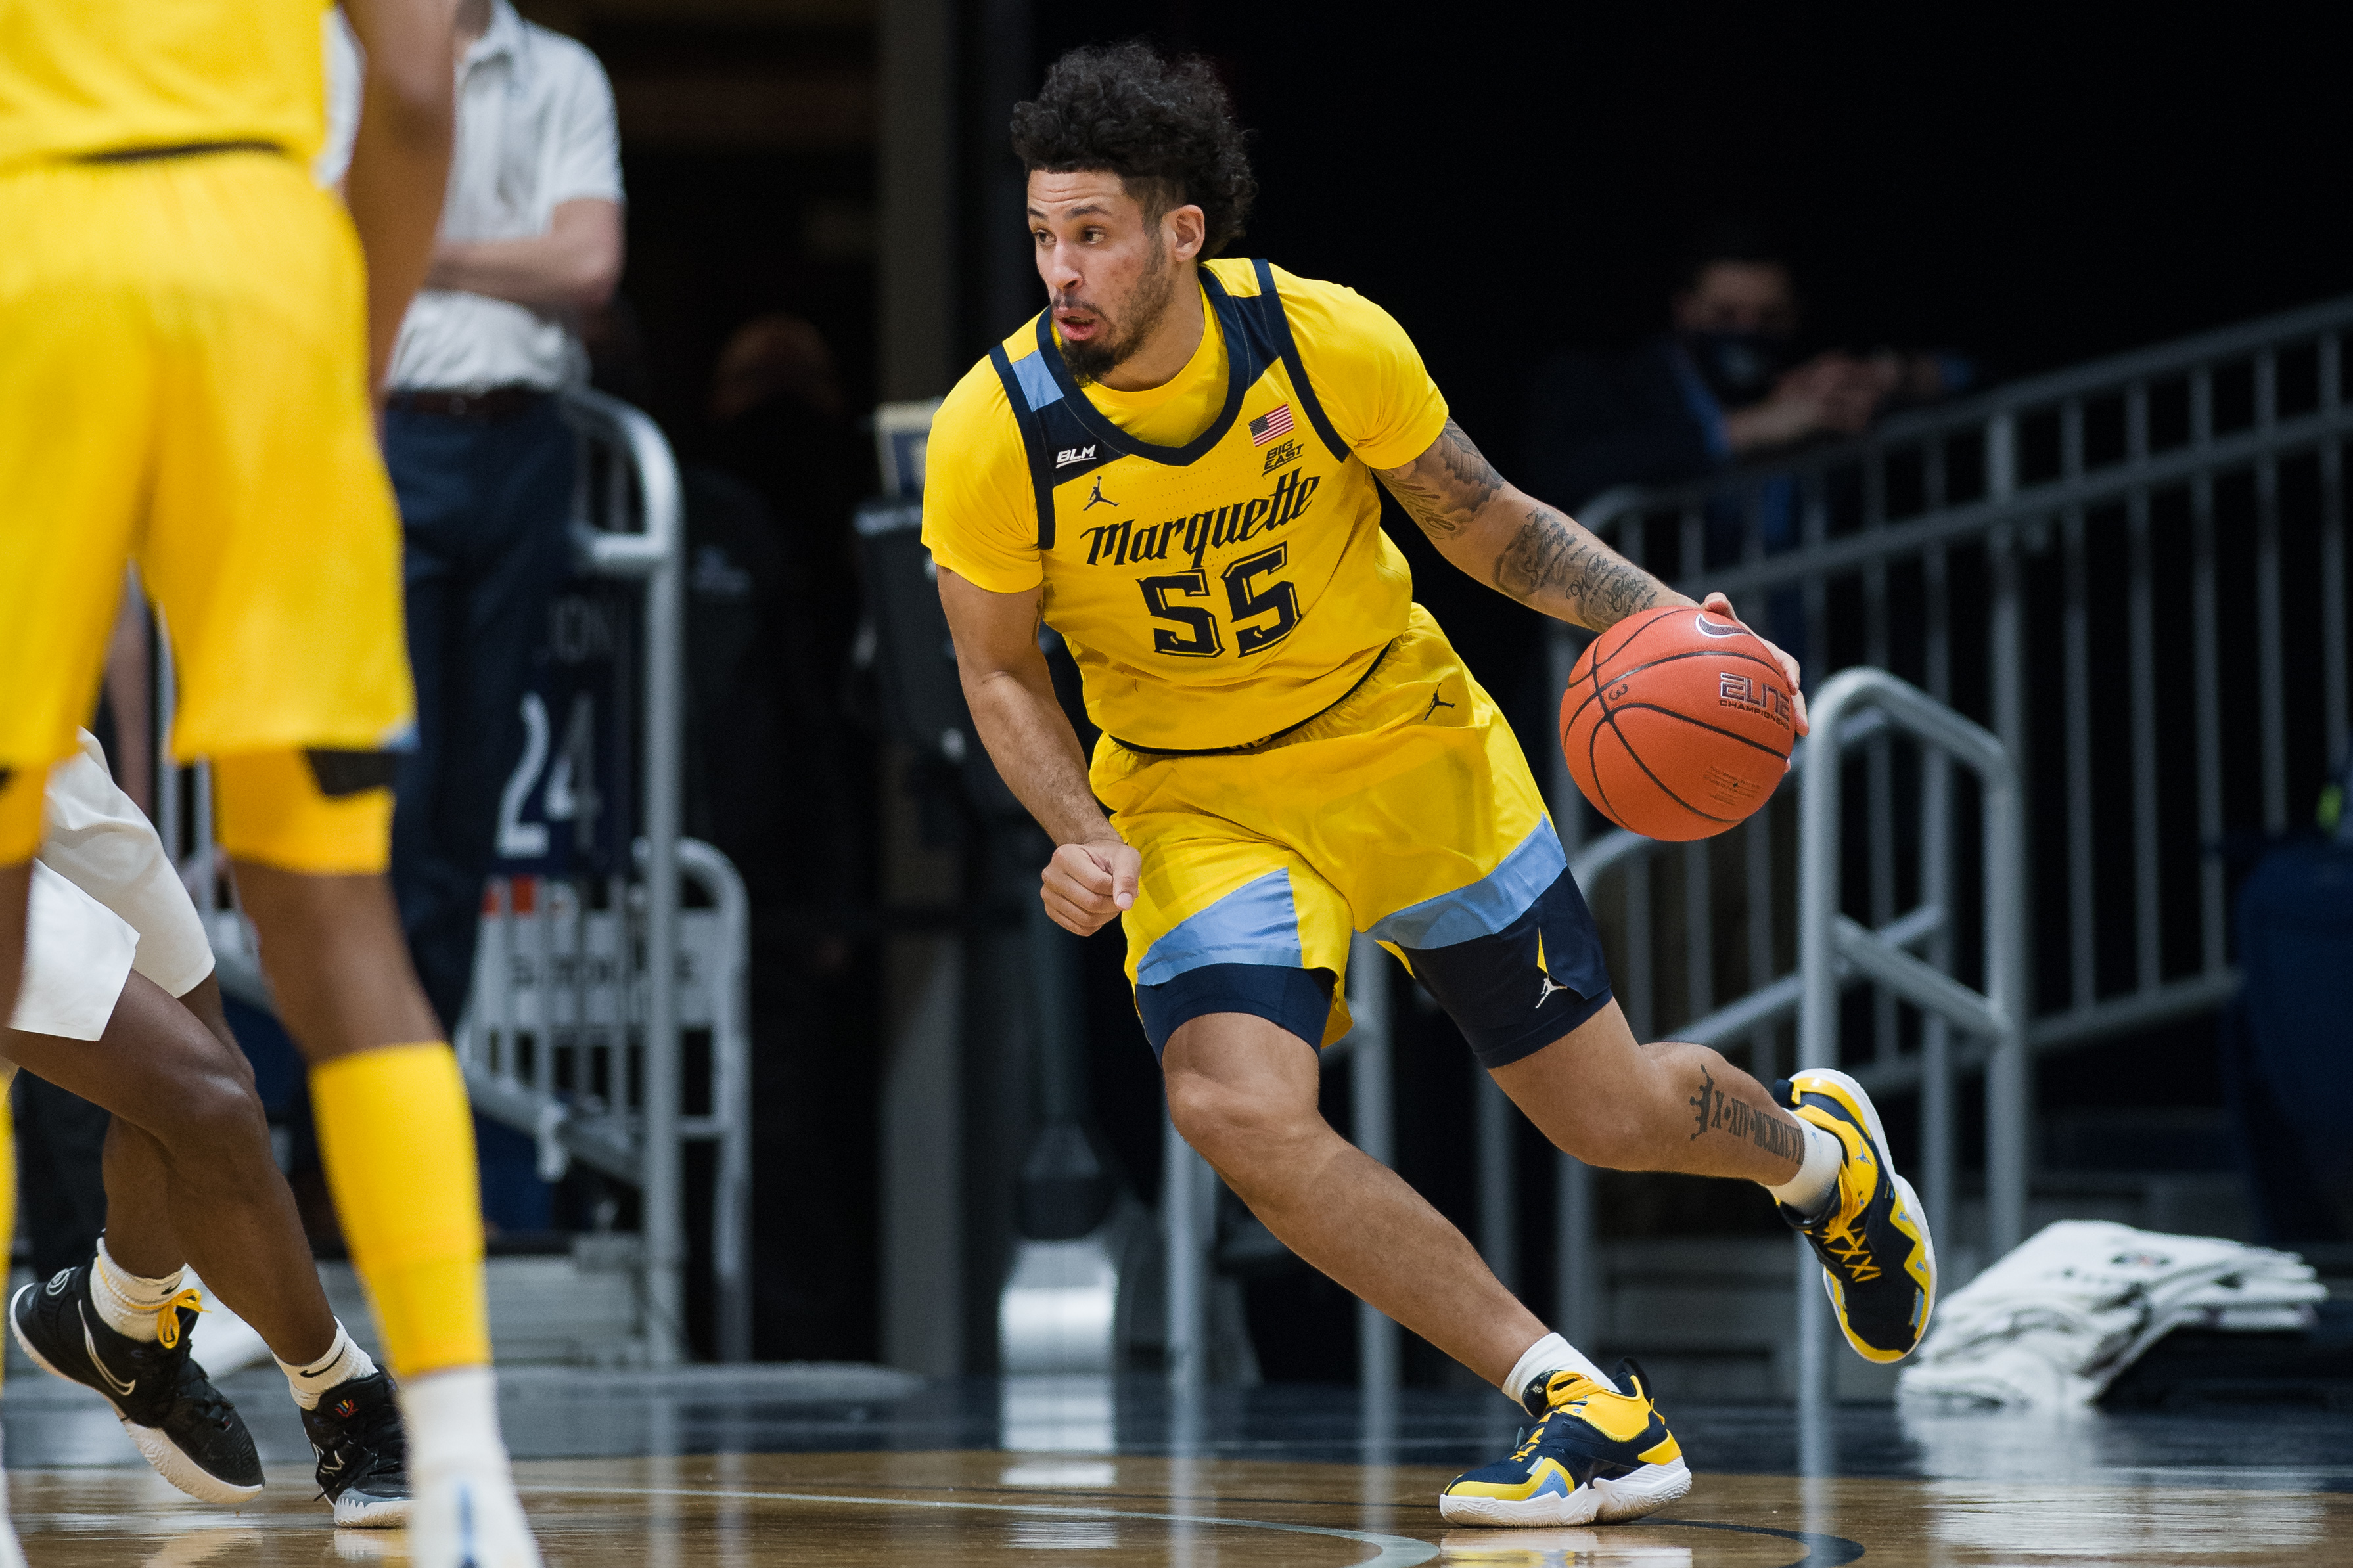 COLLEGE BASKETBALL: FEB 17 Marquette at Butler